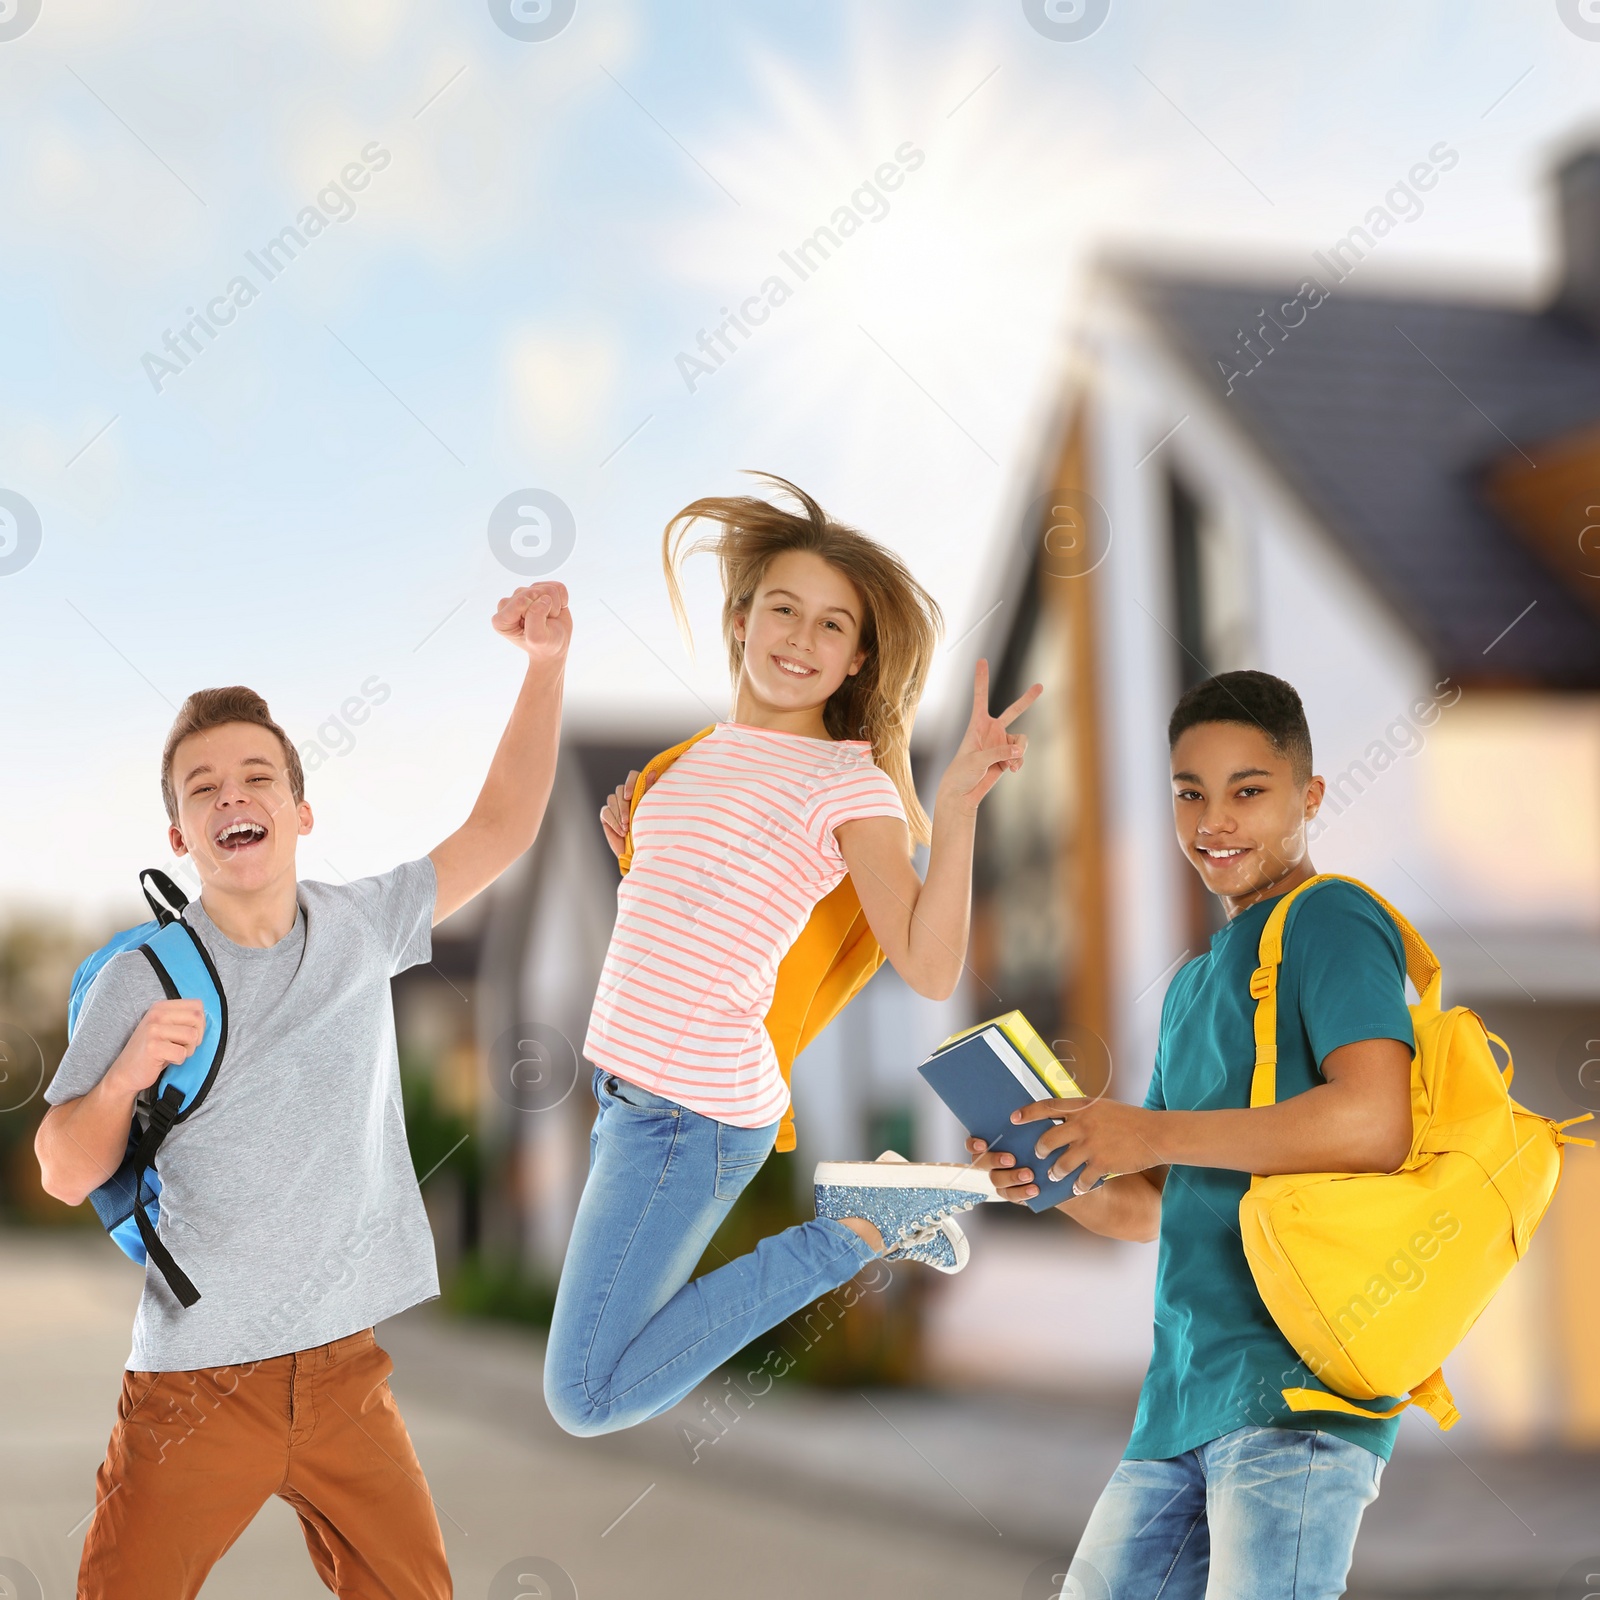 Image of Happy teenage girl jumping near classmates in front of house. School holidays